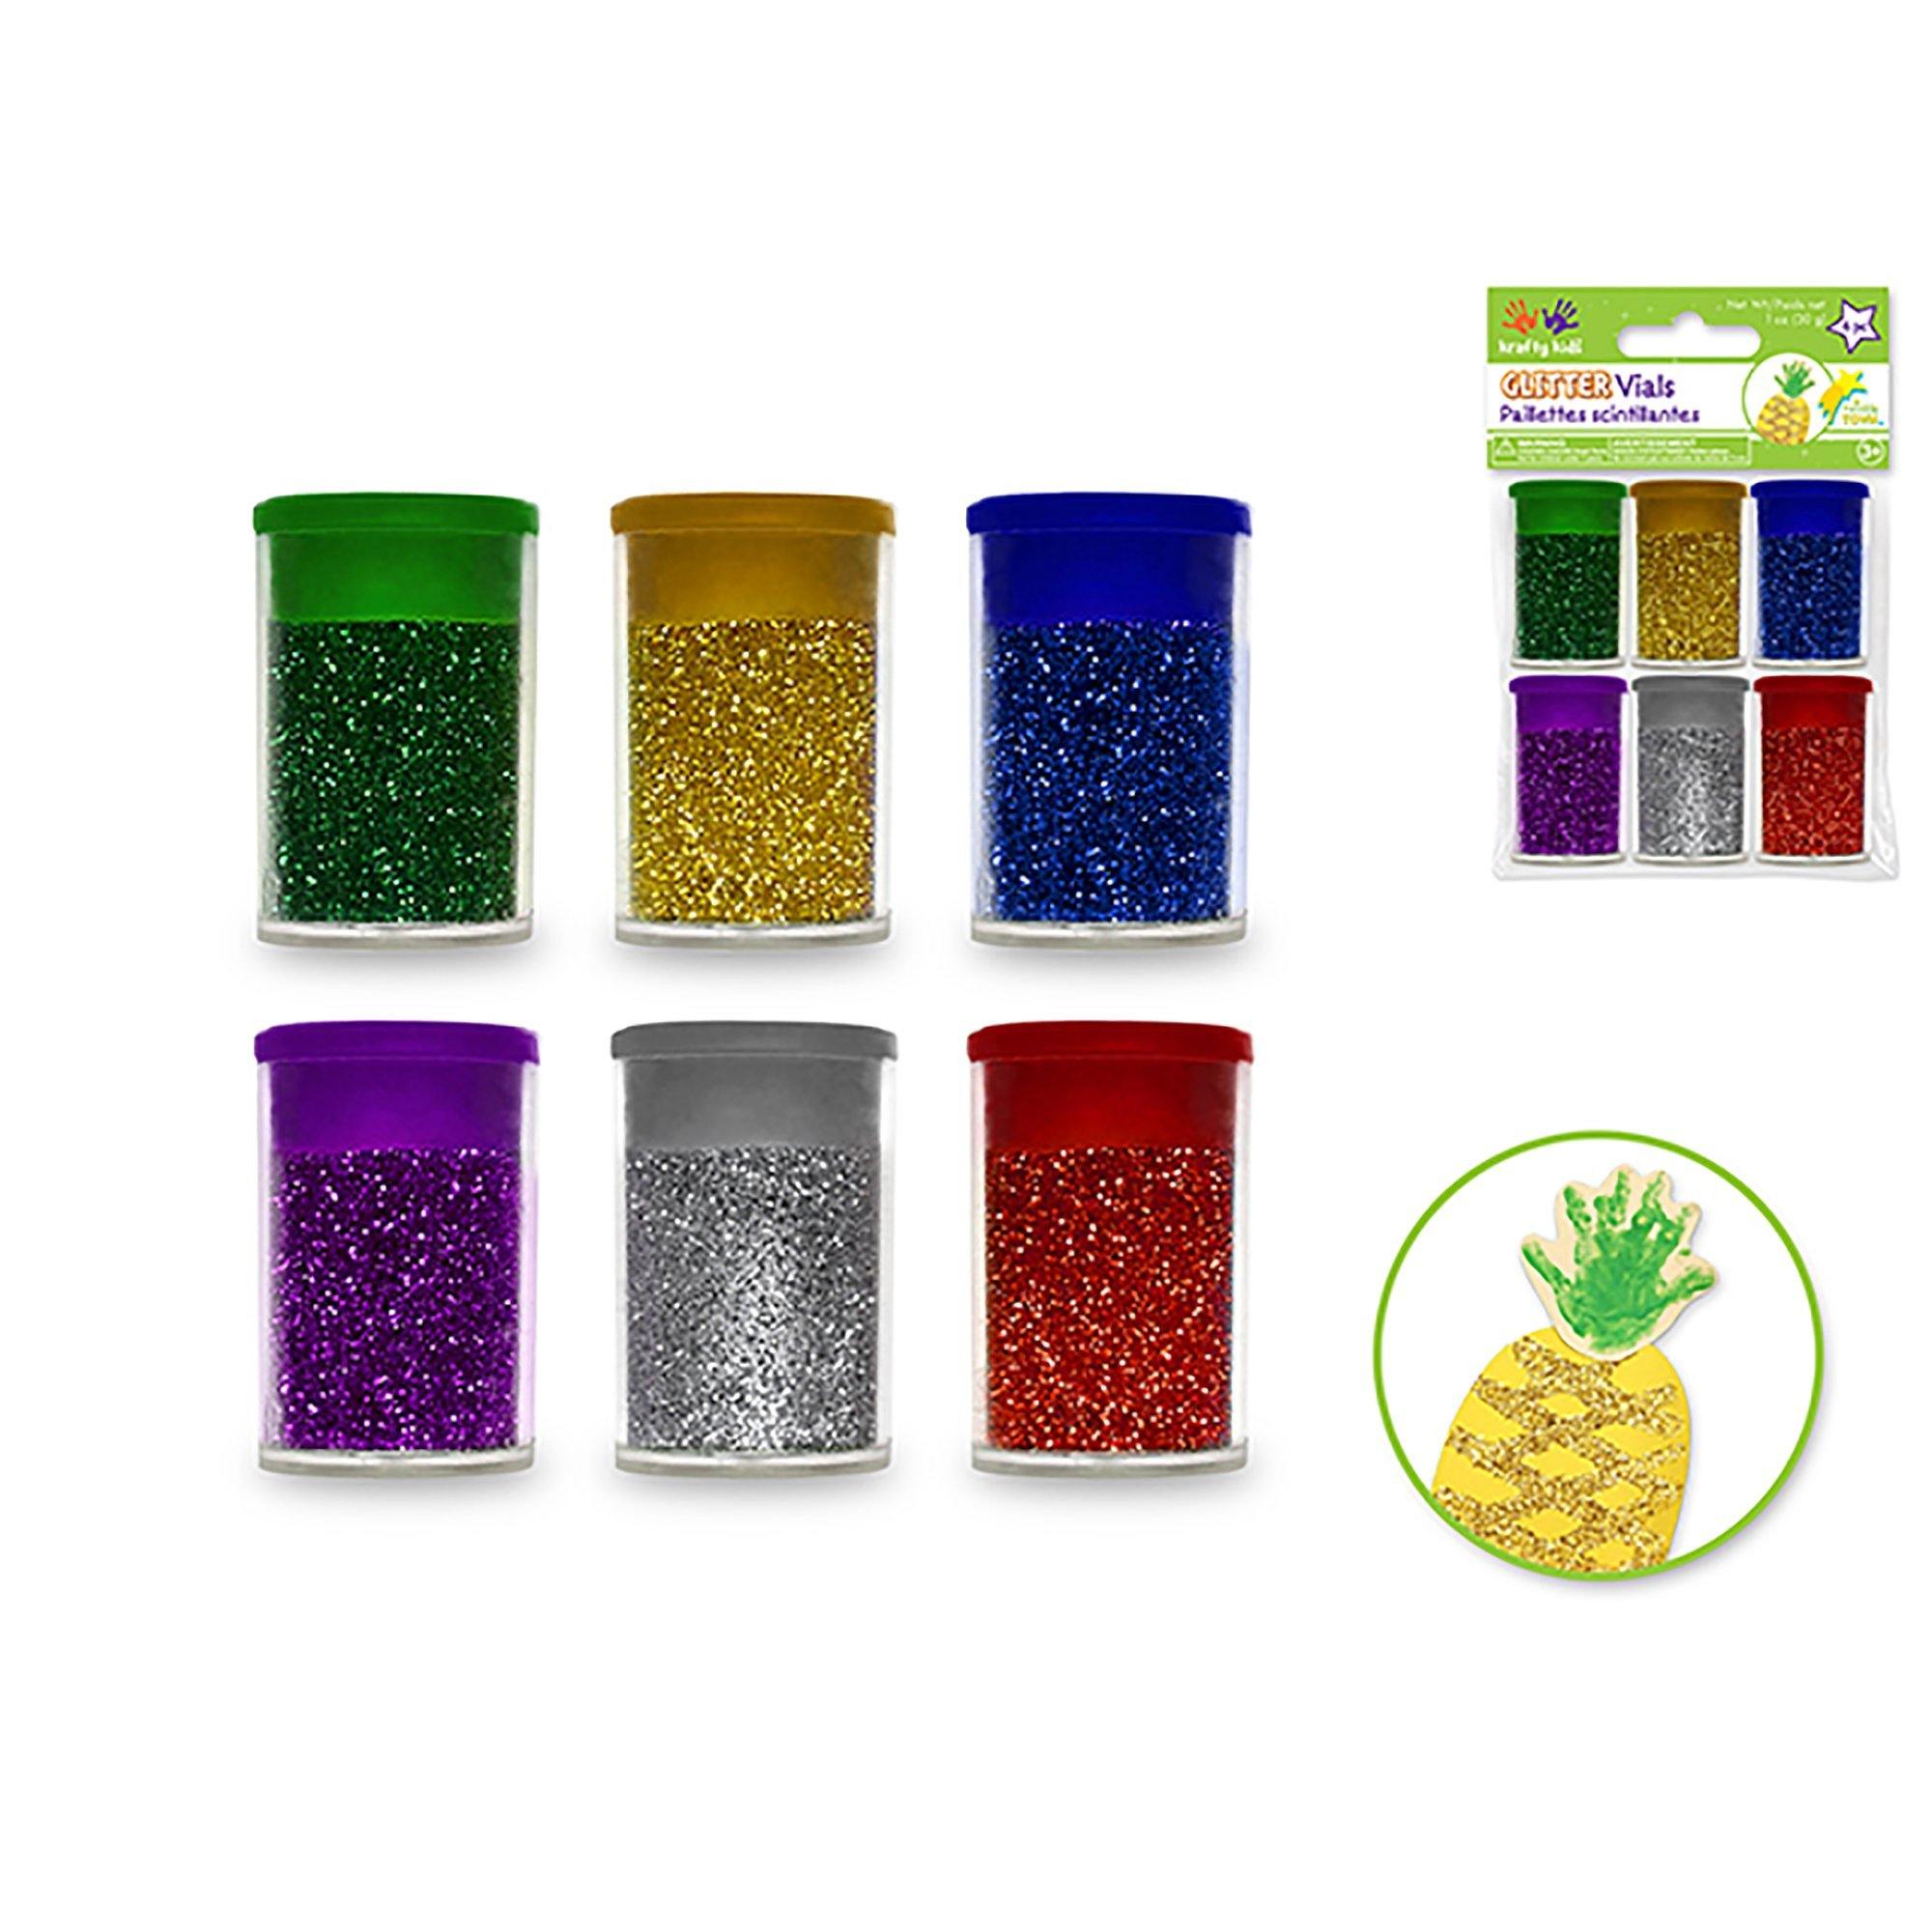 Tinsel Chenille Stems: 6mmx30cm 35/pk Glitter Pipe Cleaners -Item